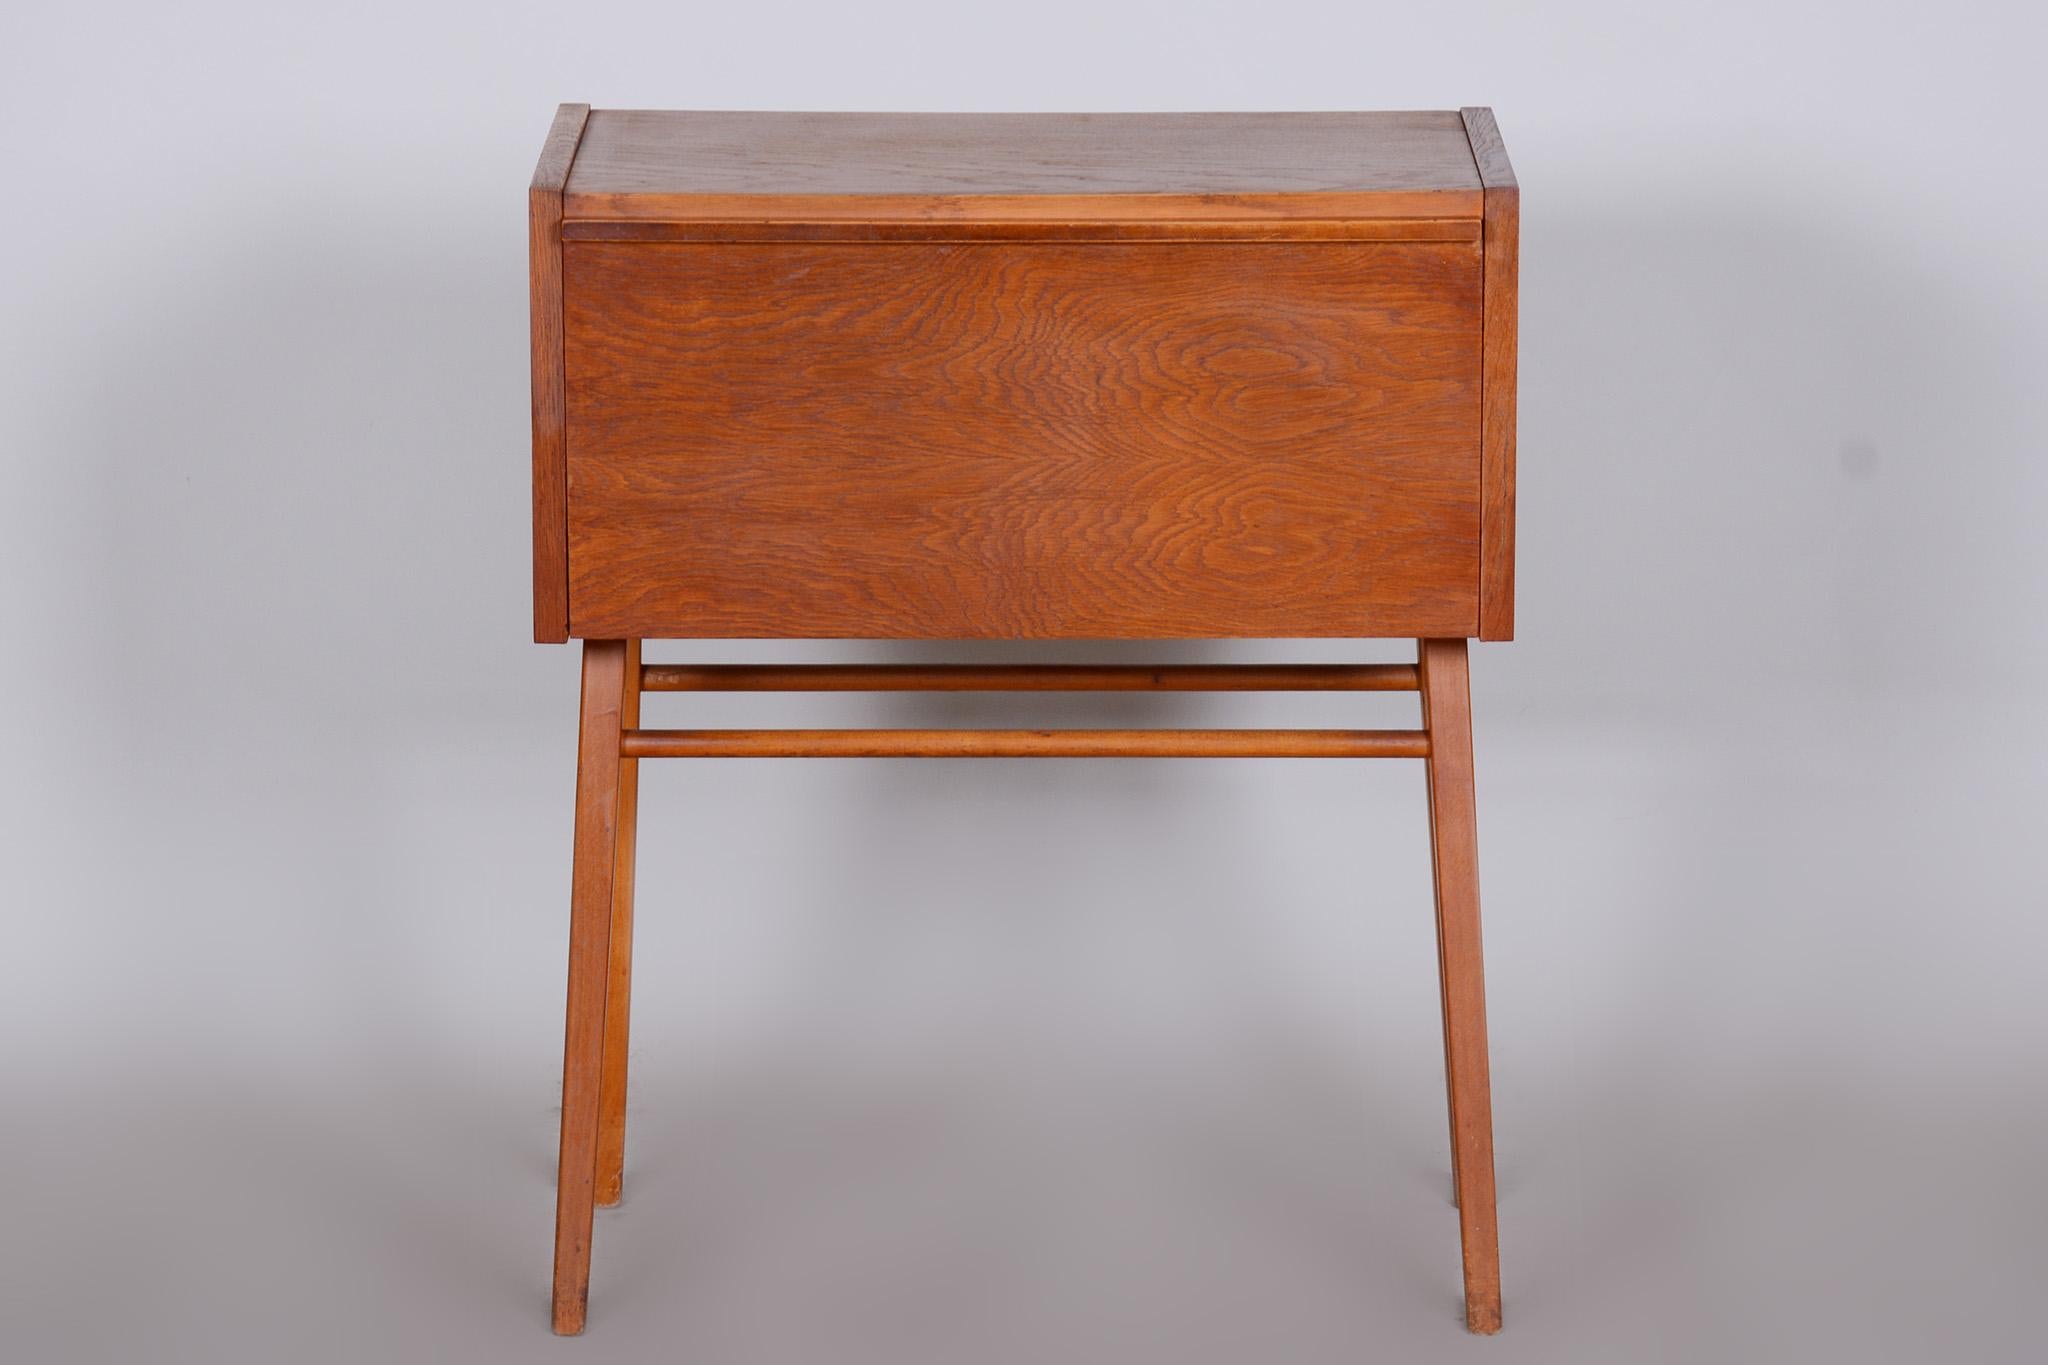 Completely restored Czech mid-century side table - cabinet made out of oak, 1950s, refreshed polish.

Stable construction
Refreshed polish
Fully functional

Period: 1950-1959.